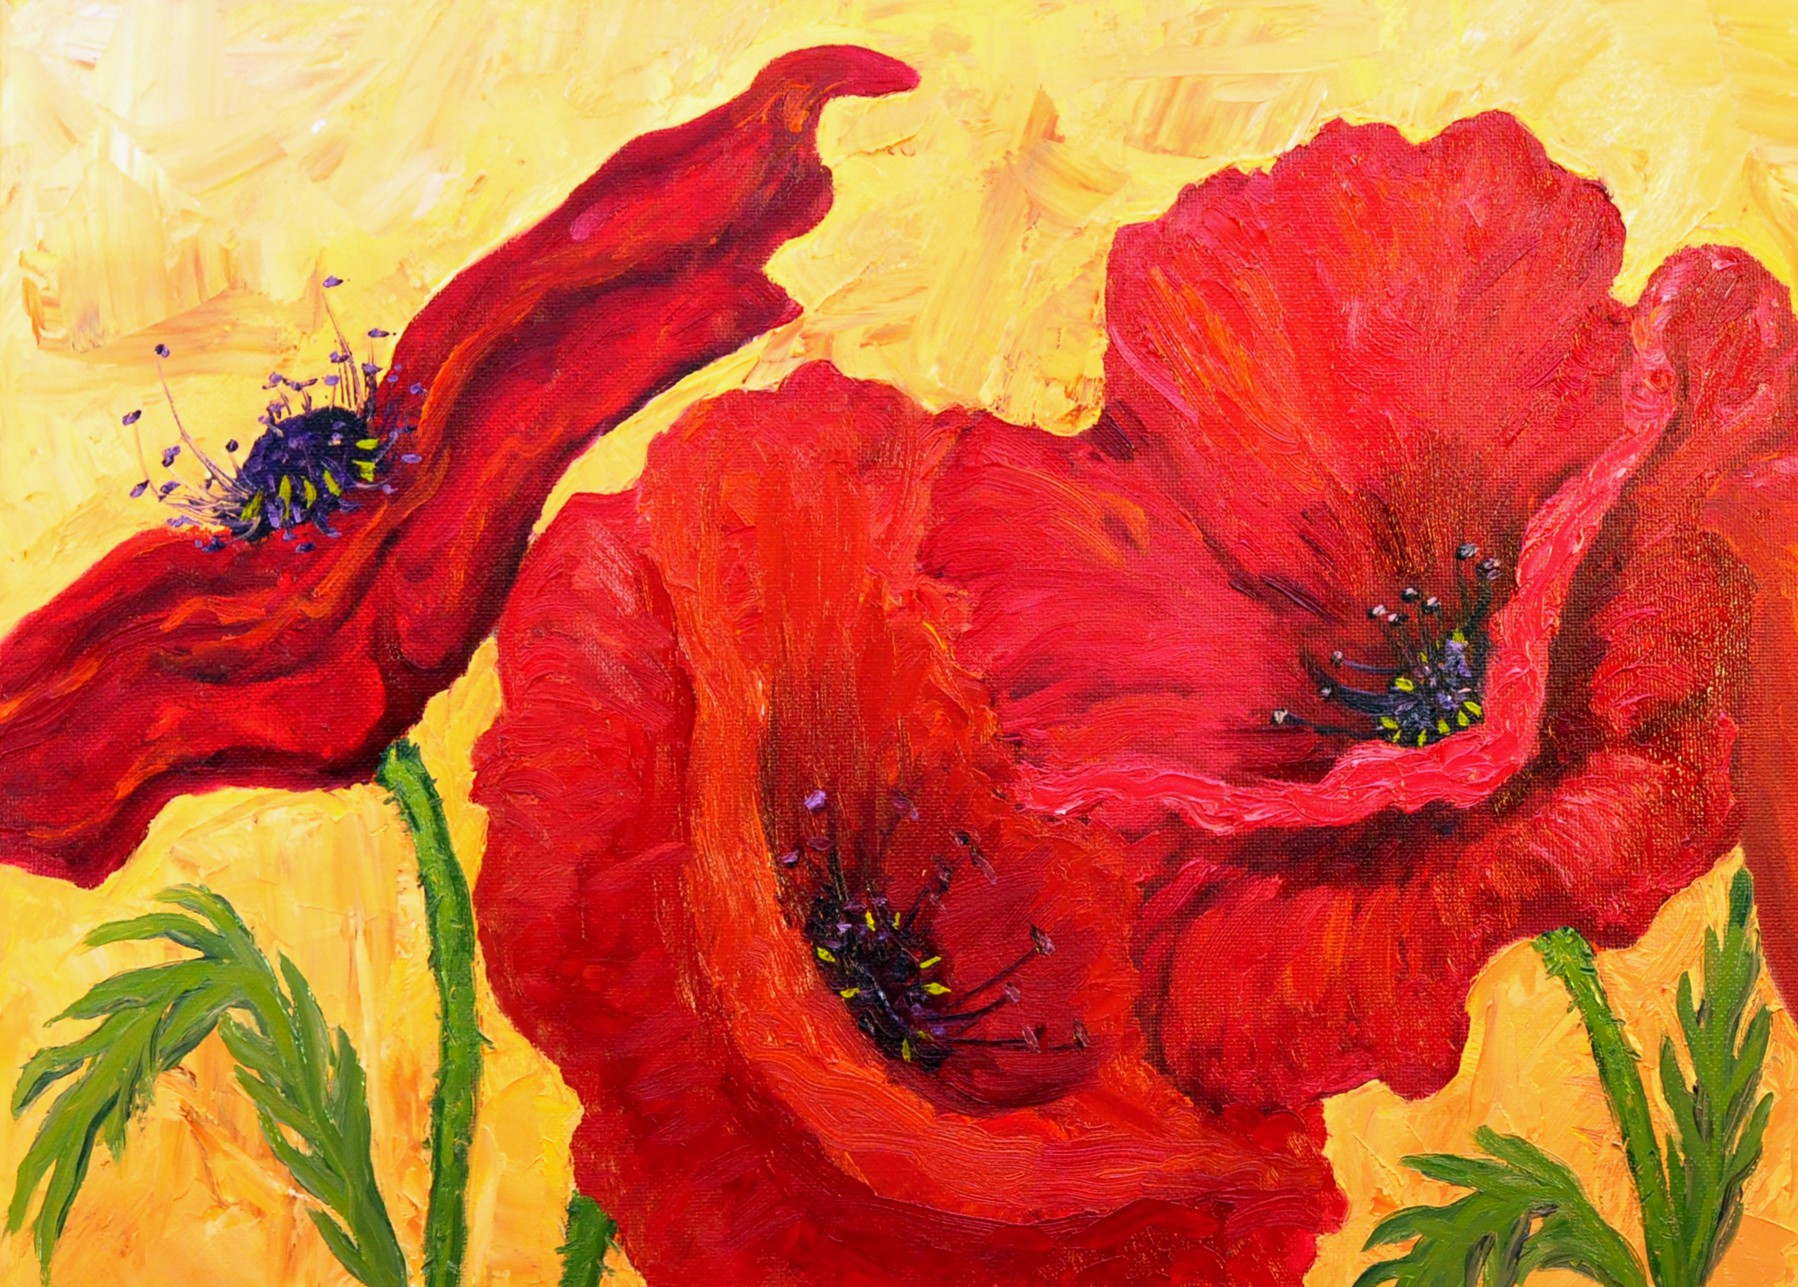 cropped-completed-poppies-in-oilcroppedforcard-2dsc_5495.jpg